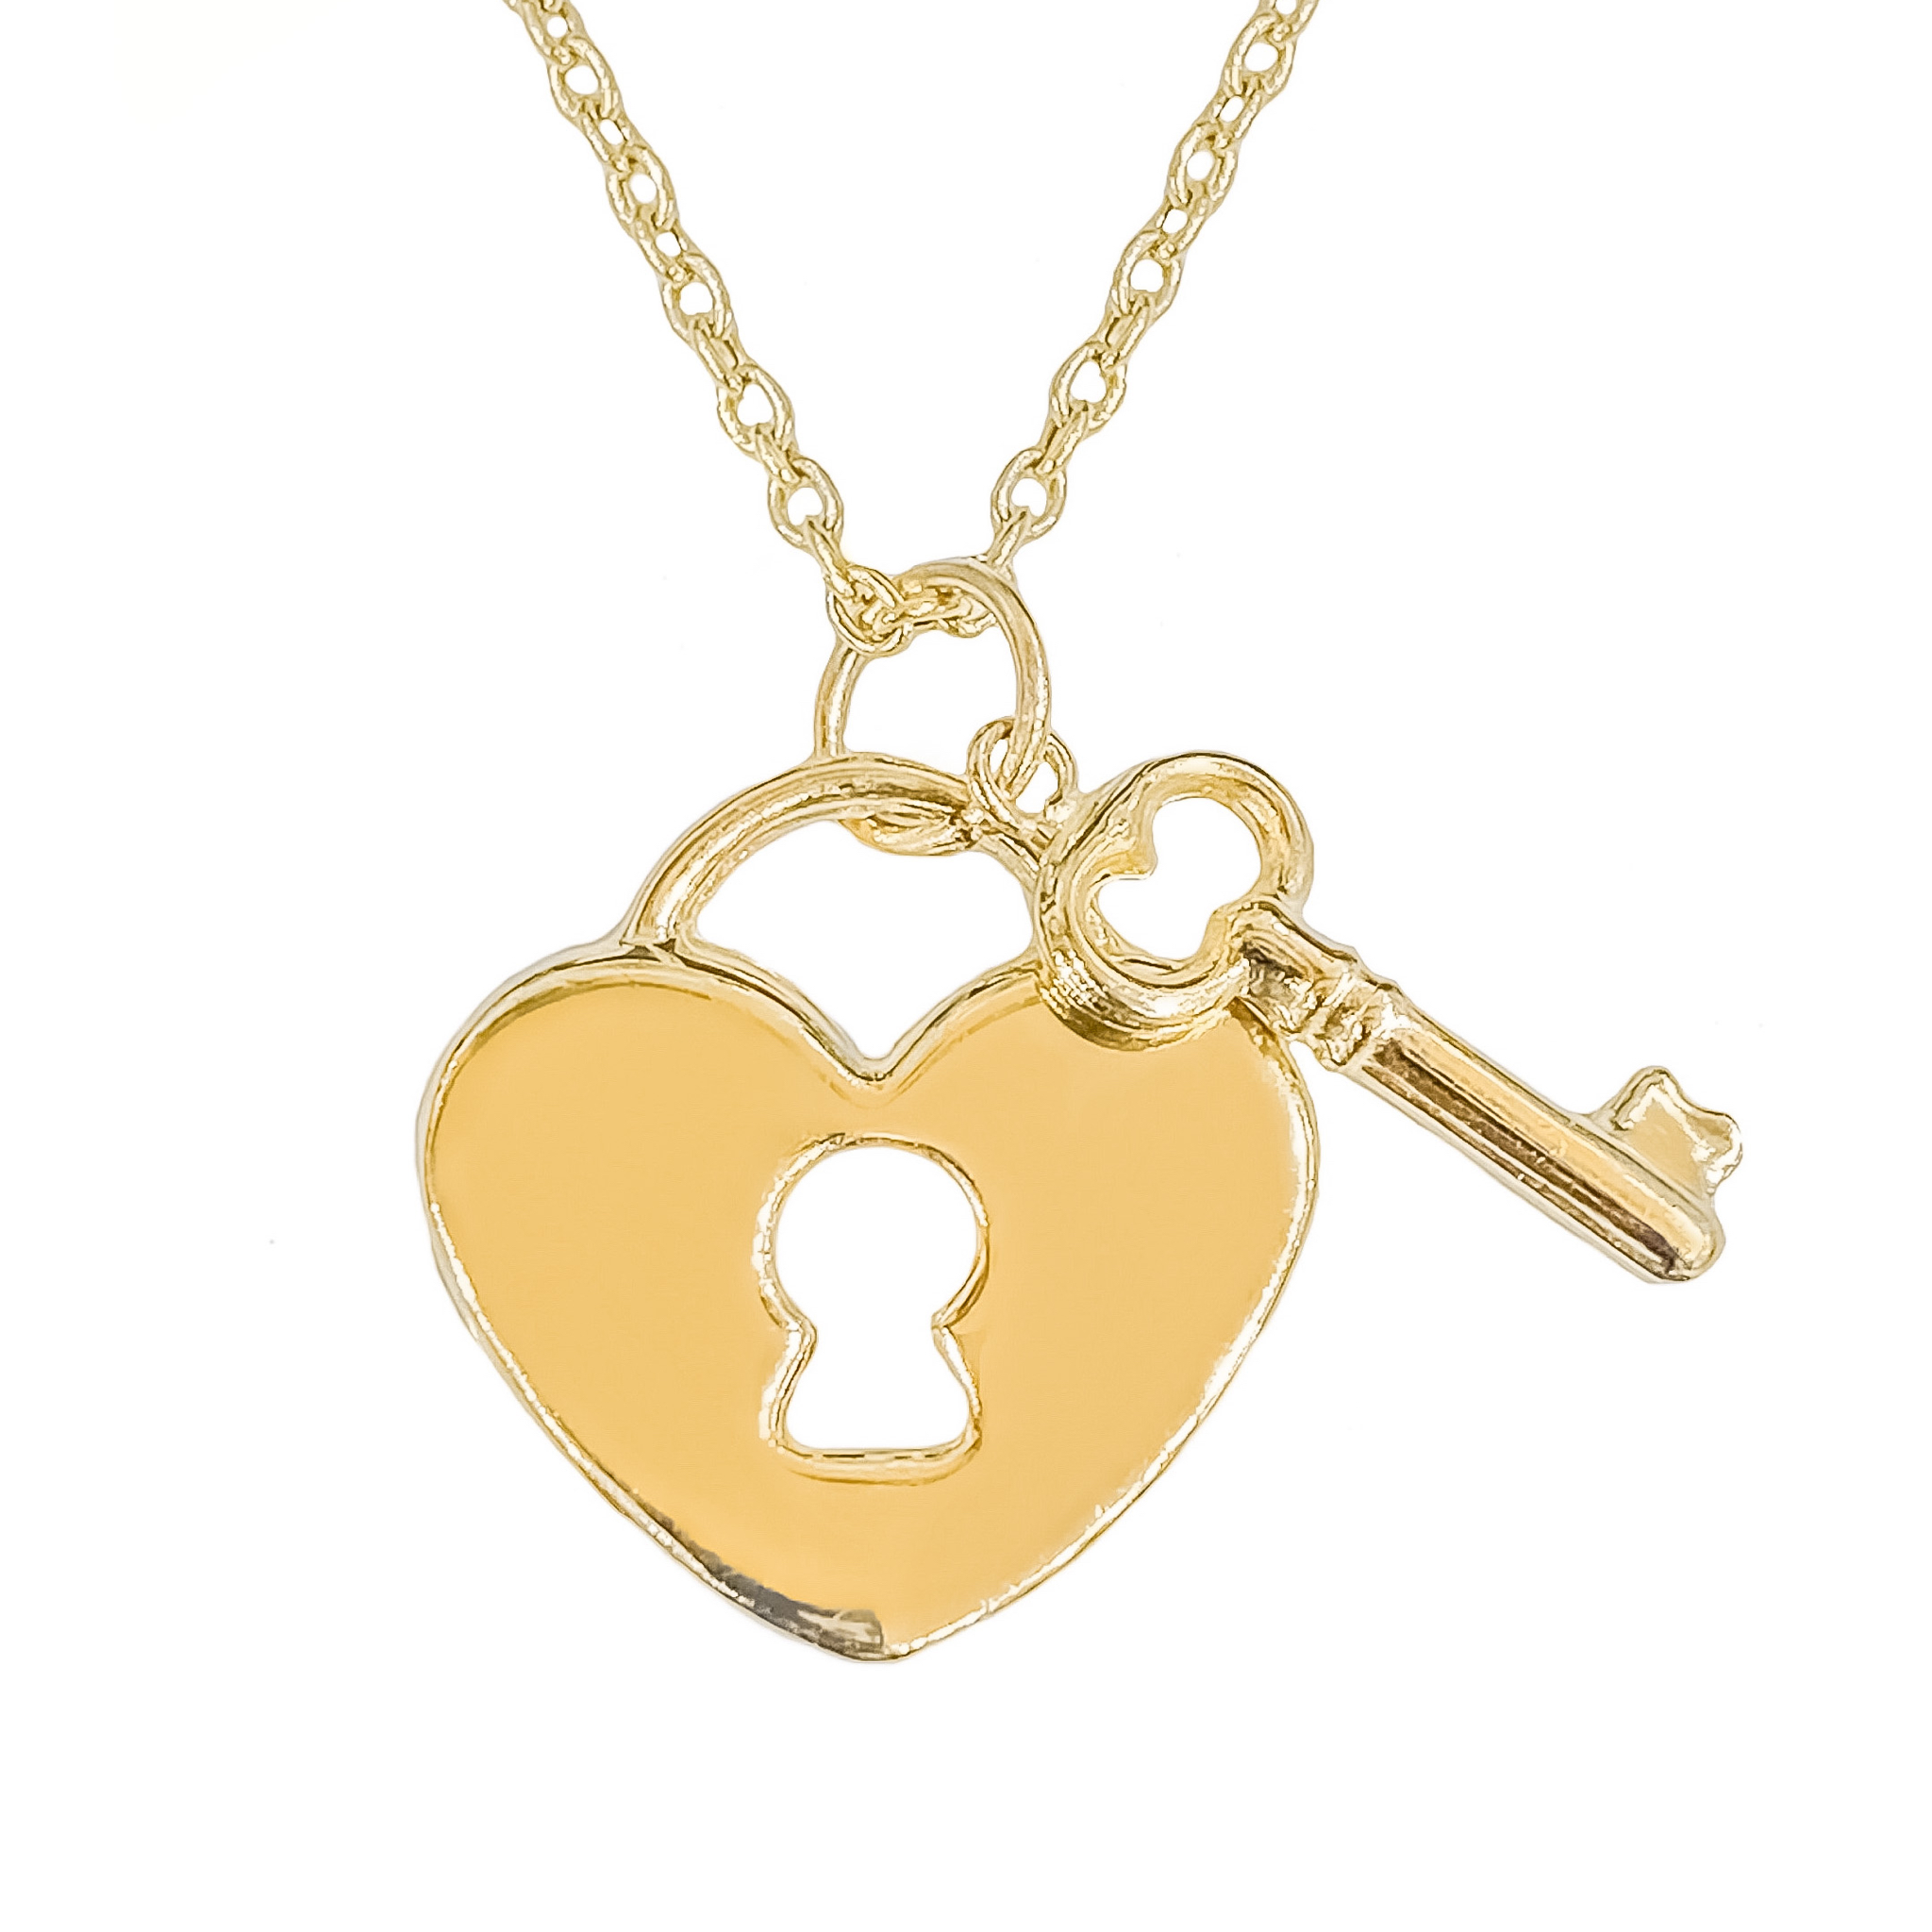 WORKING Heart Padlock and Key on Necklaces. Best Friends, Couples, Lovers,  Others. Give Someone the Key to Your Heart. - Etsy